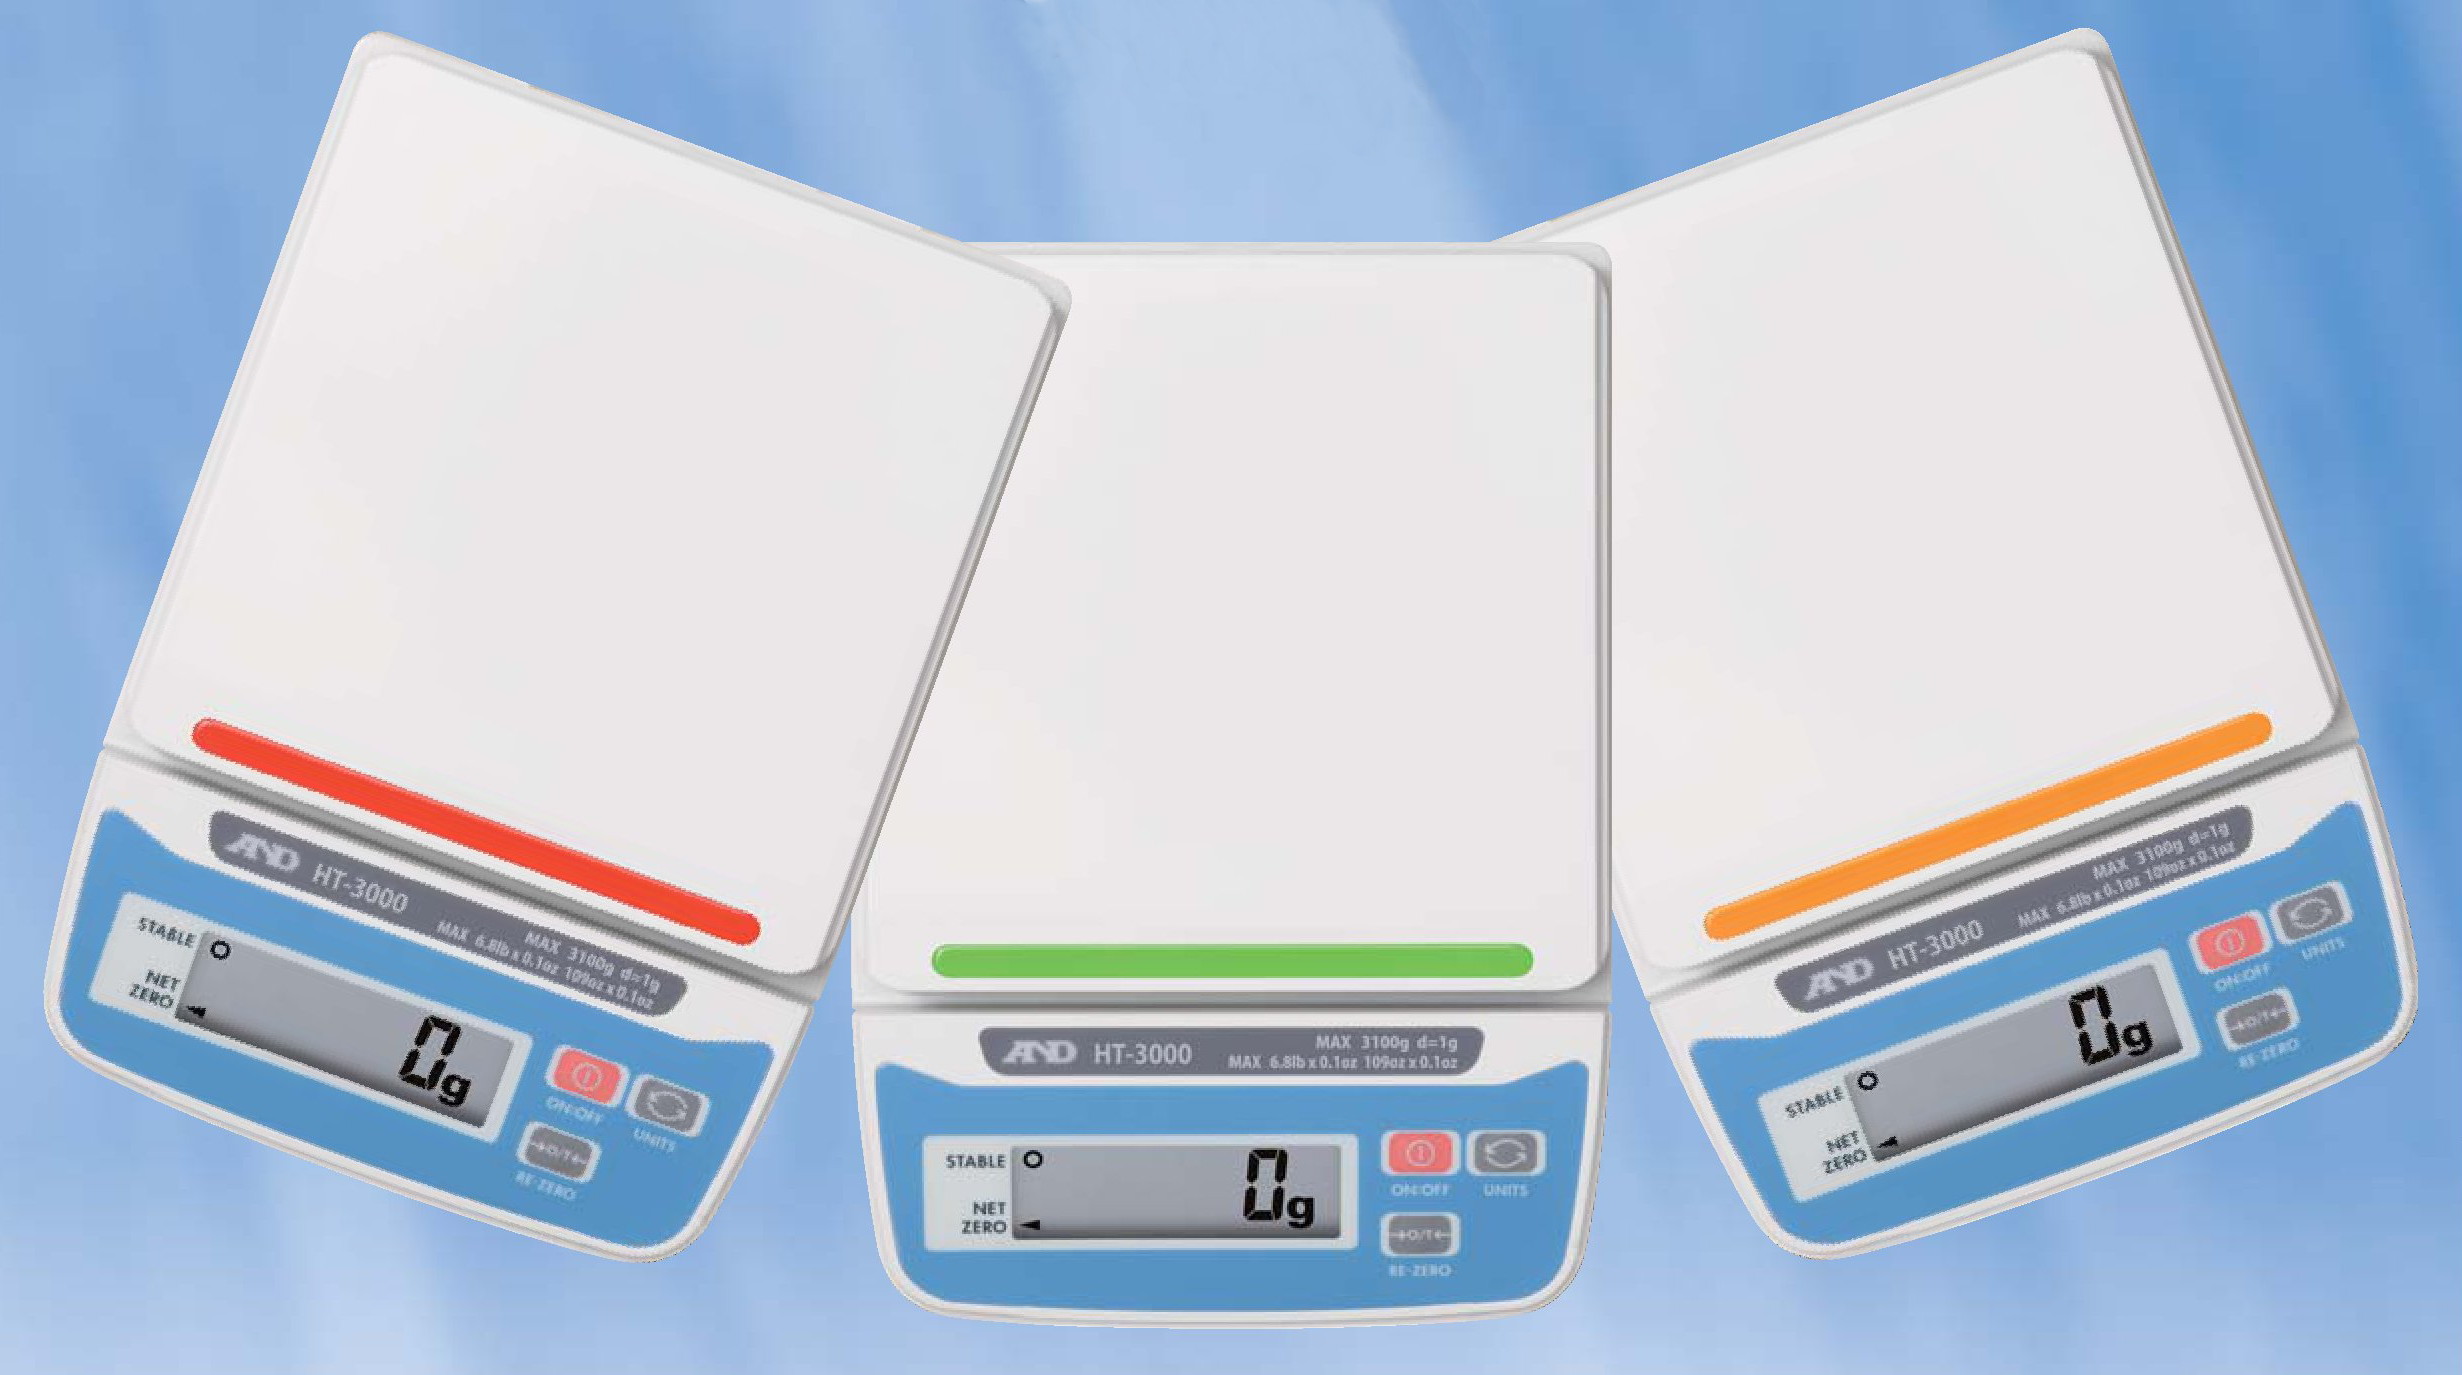 Compact Scales, HT Series, A&D Balance